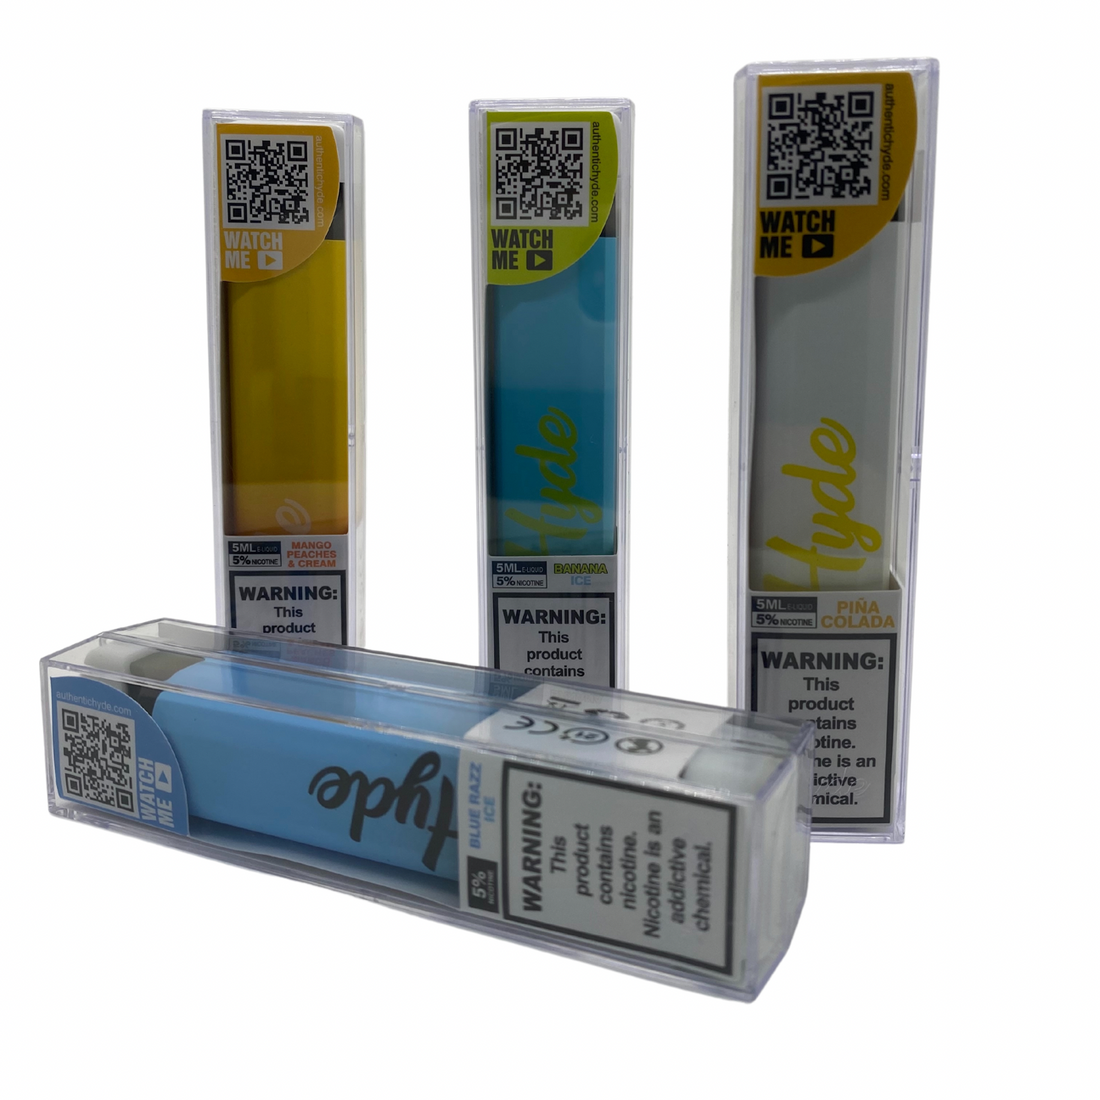 Hyde Edge 1500 Puffs - The Top Choice of Many Vapers